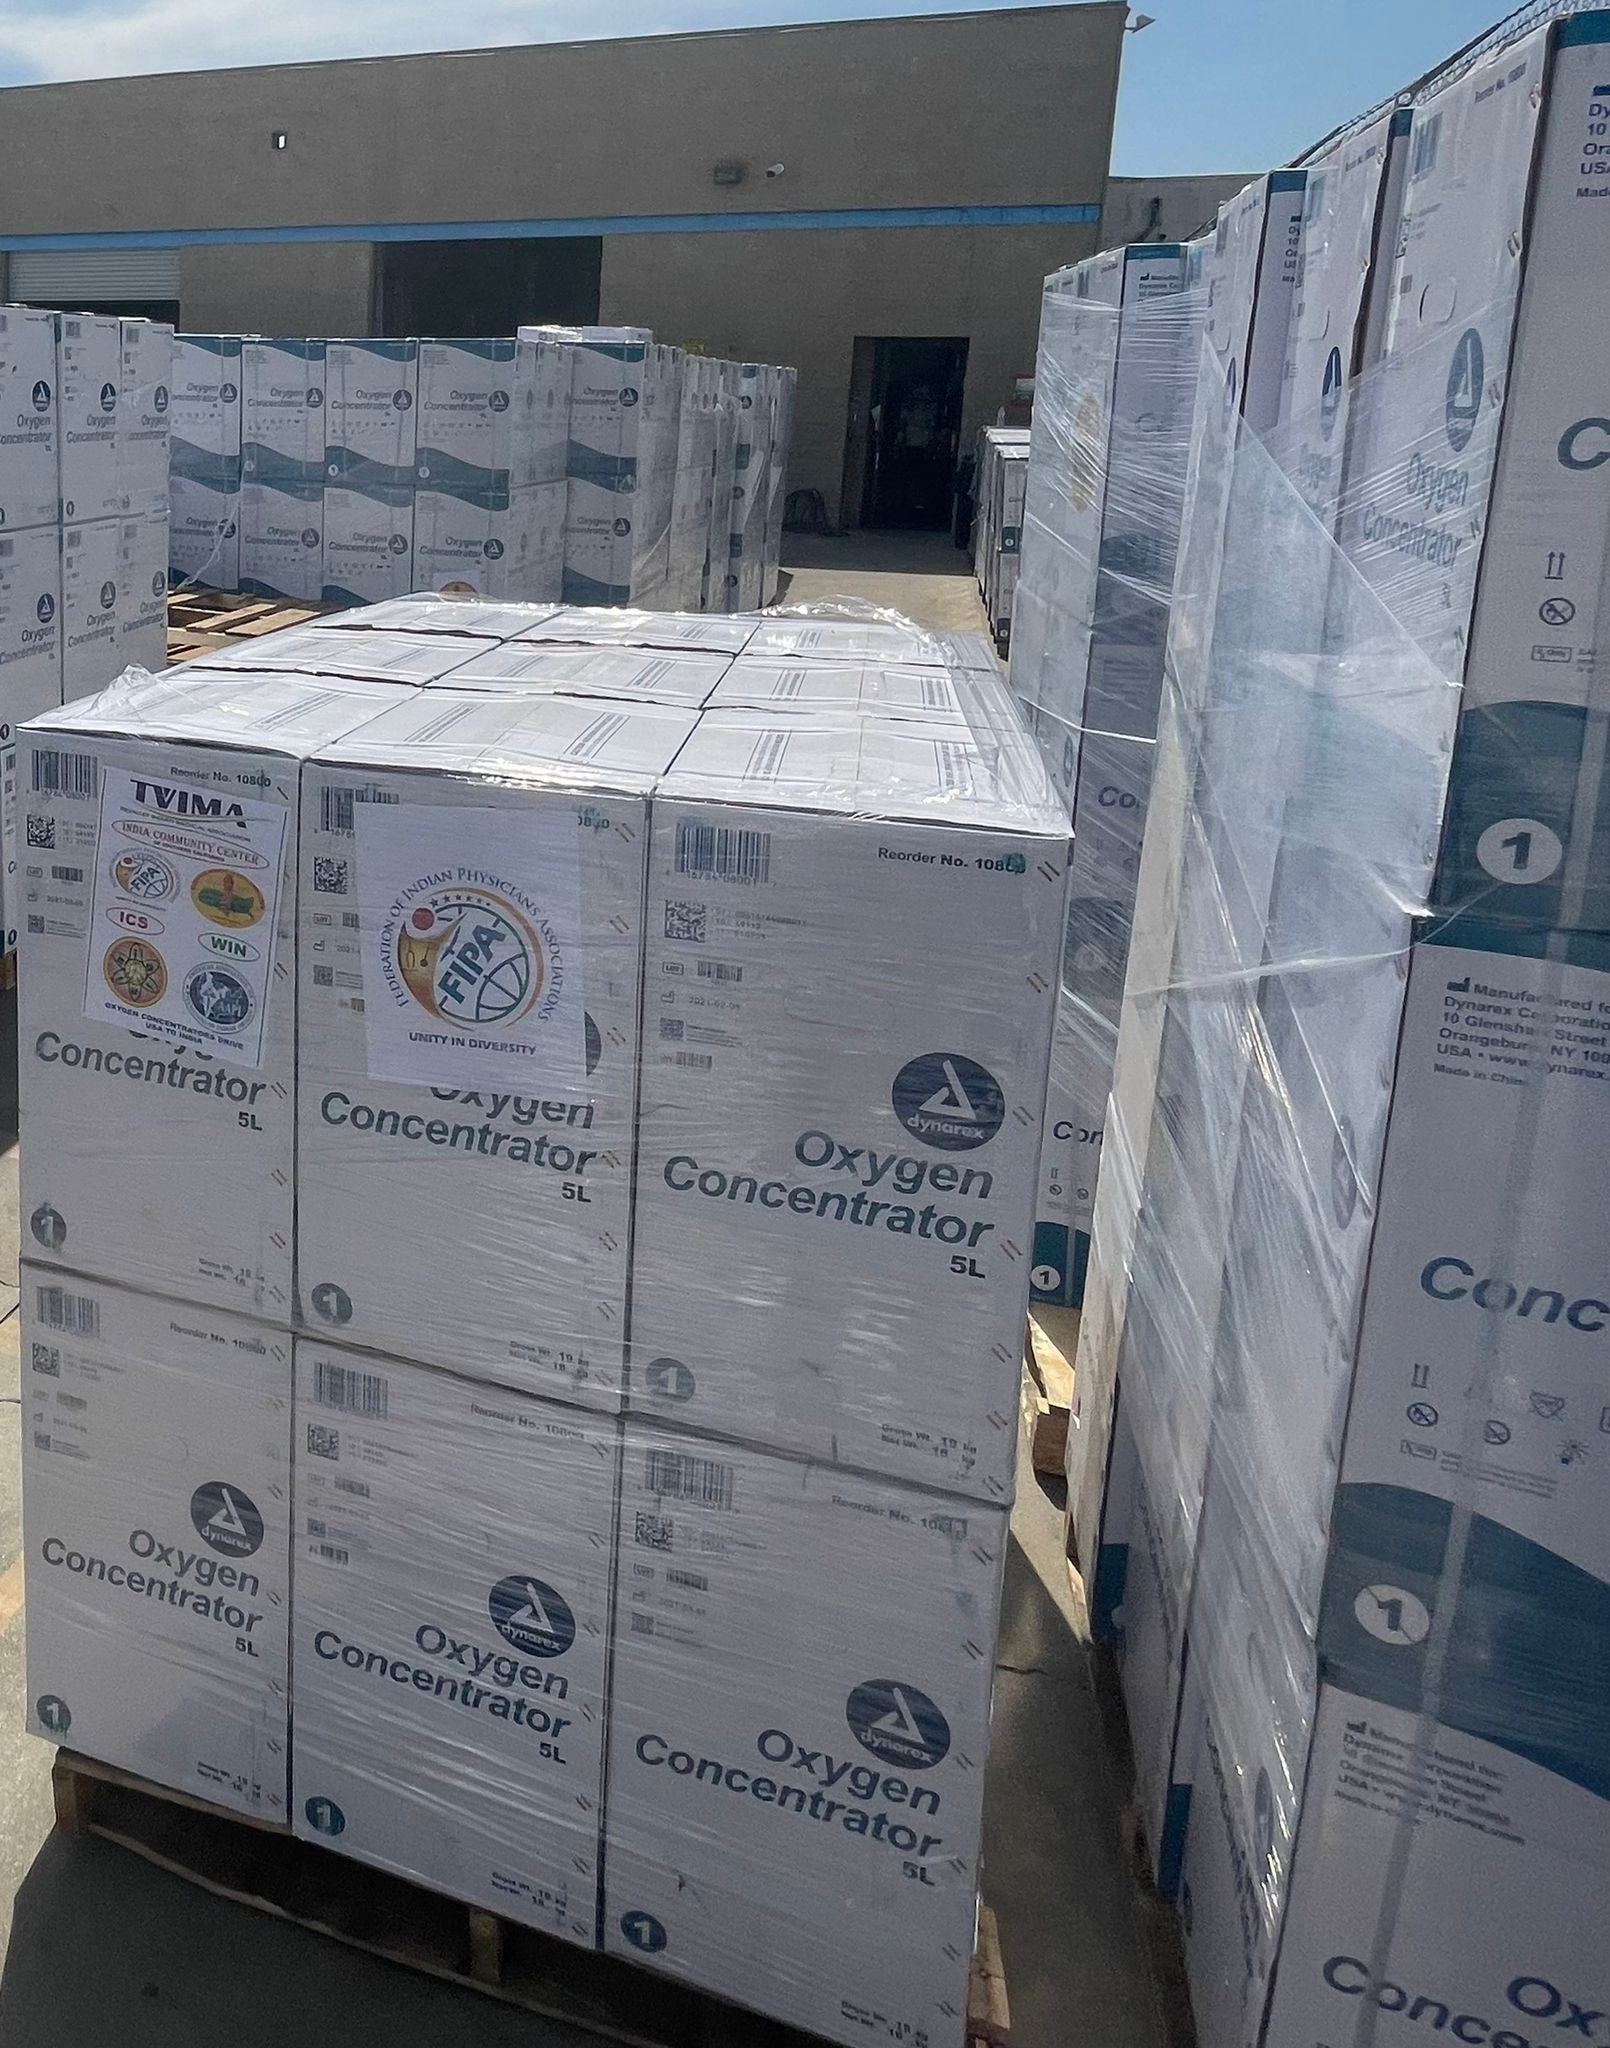 FIPA, other associations and charities send 5,000 oxygen concentrators to India